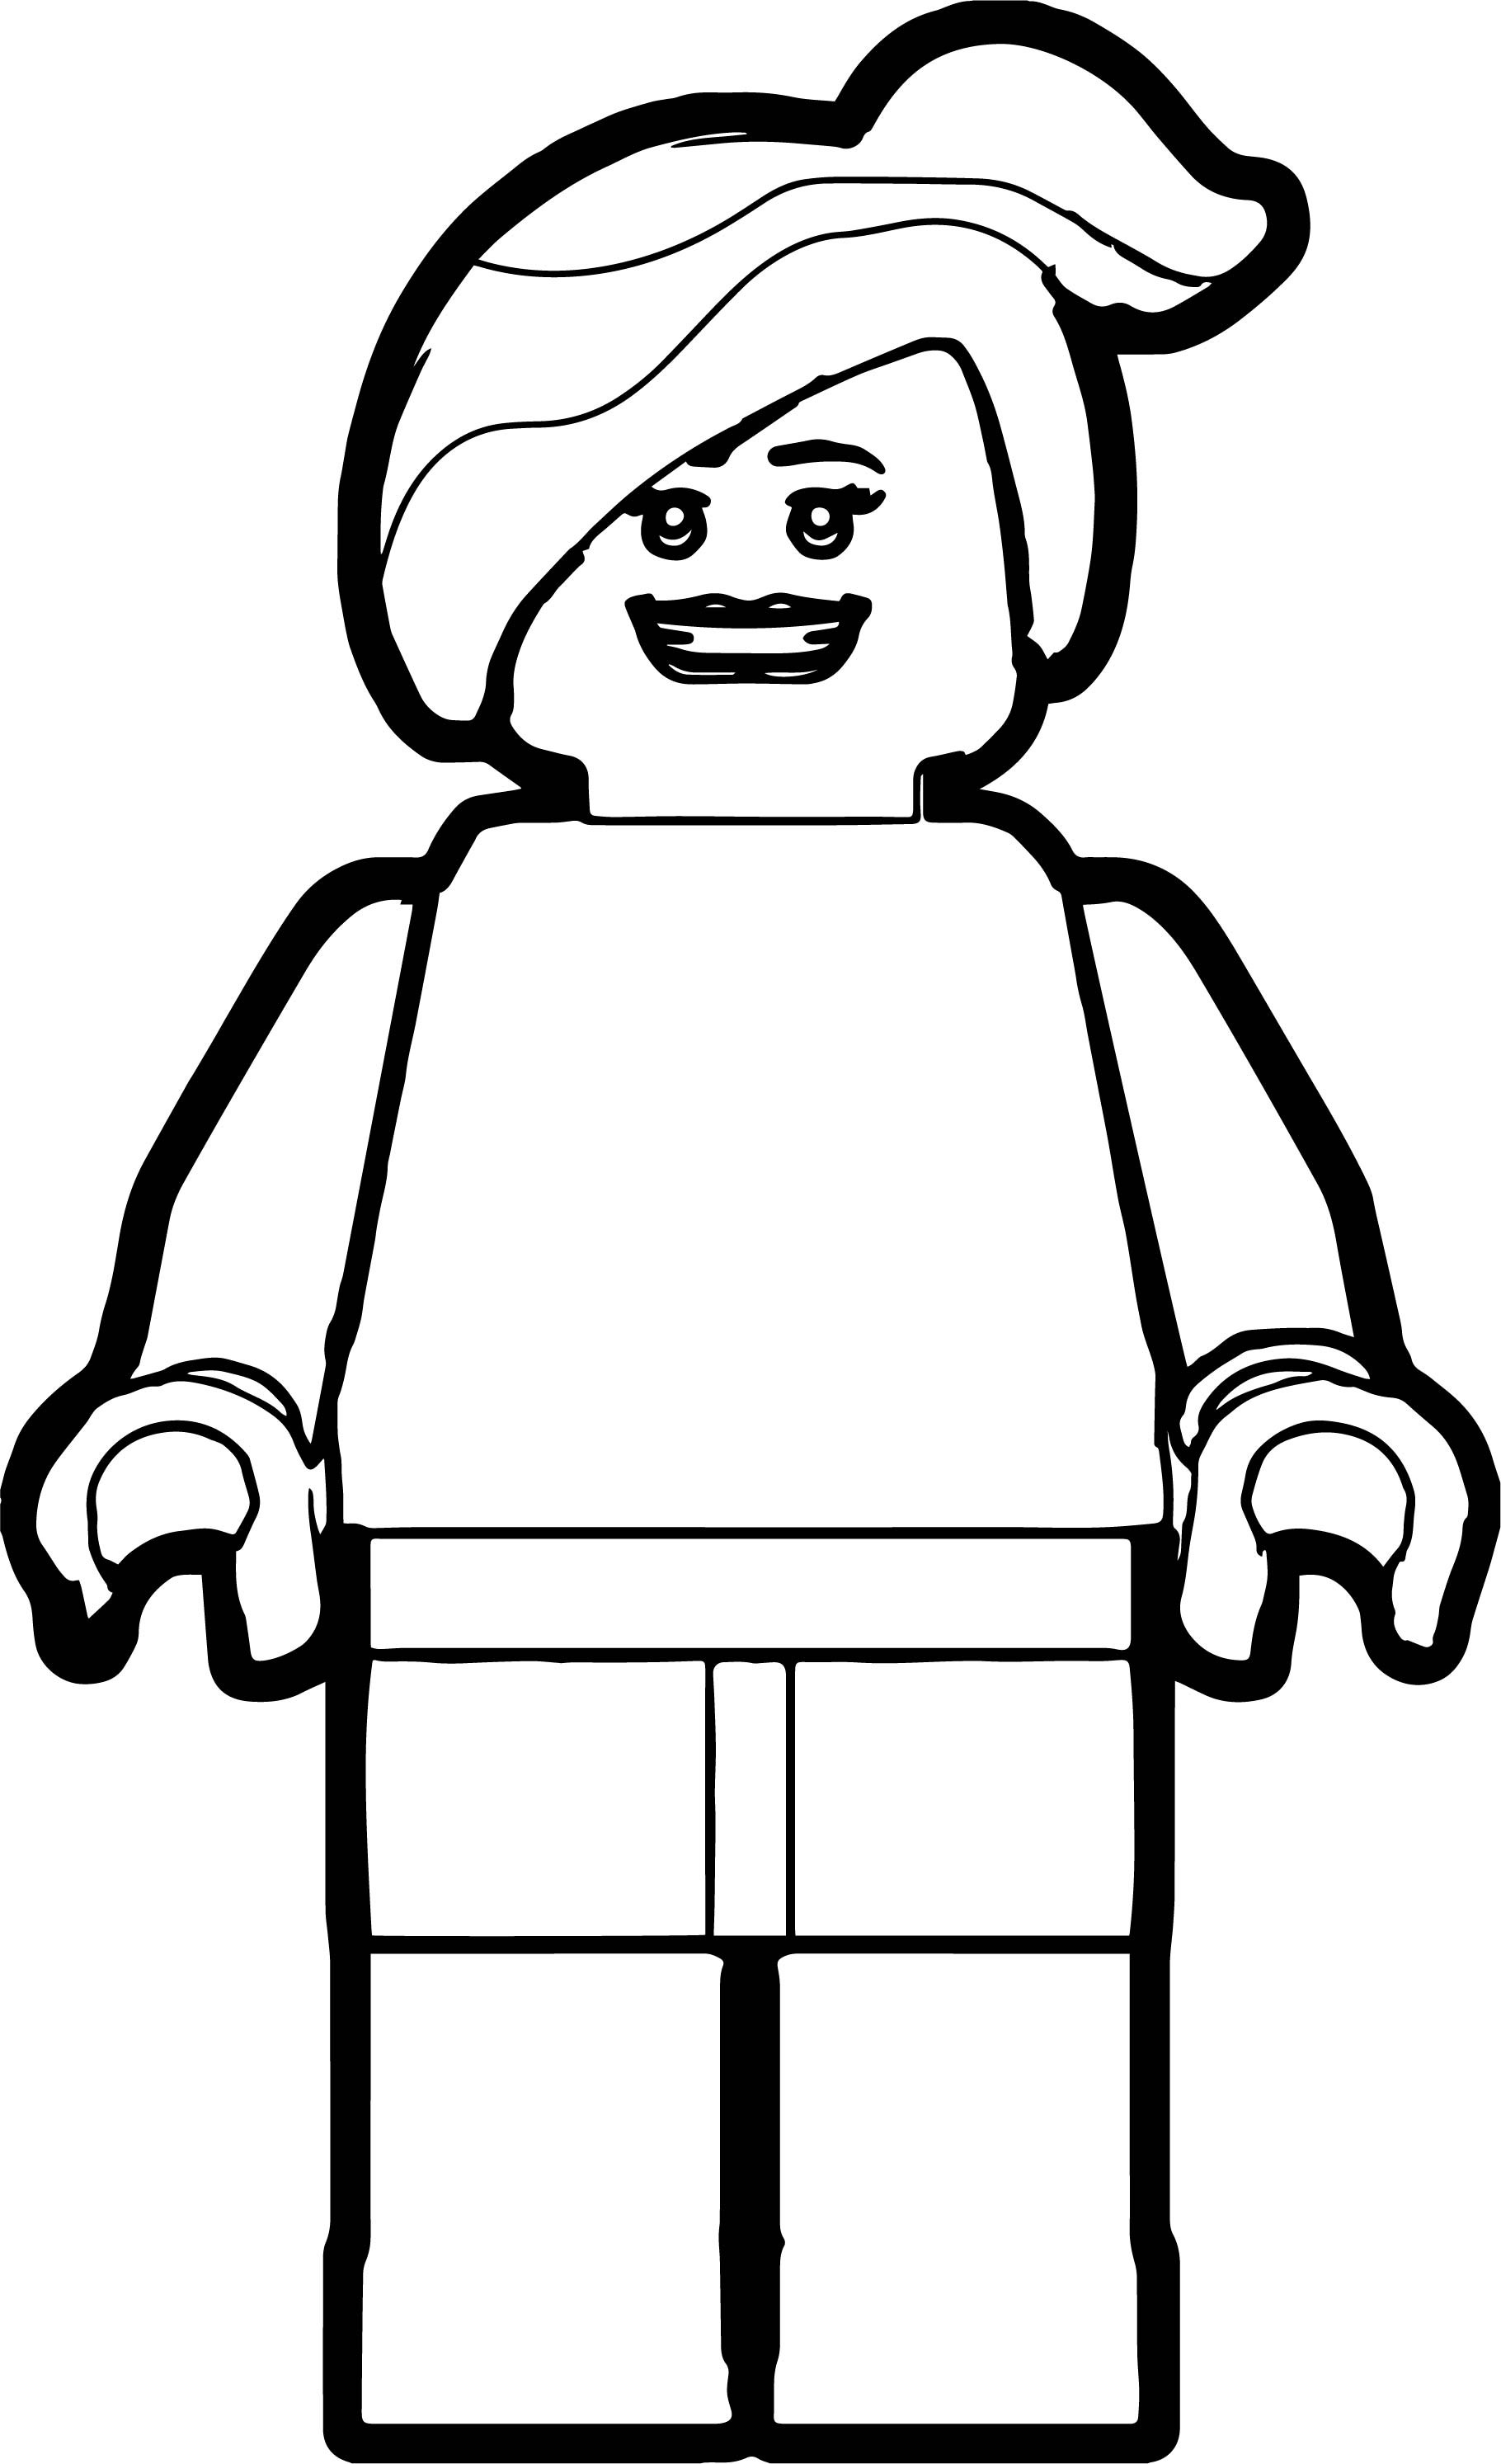 Lego Girl Coloring Pages
 Lego Woman Coloring Page